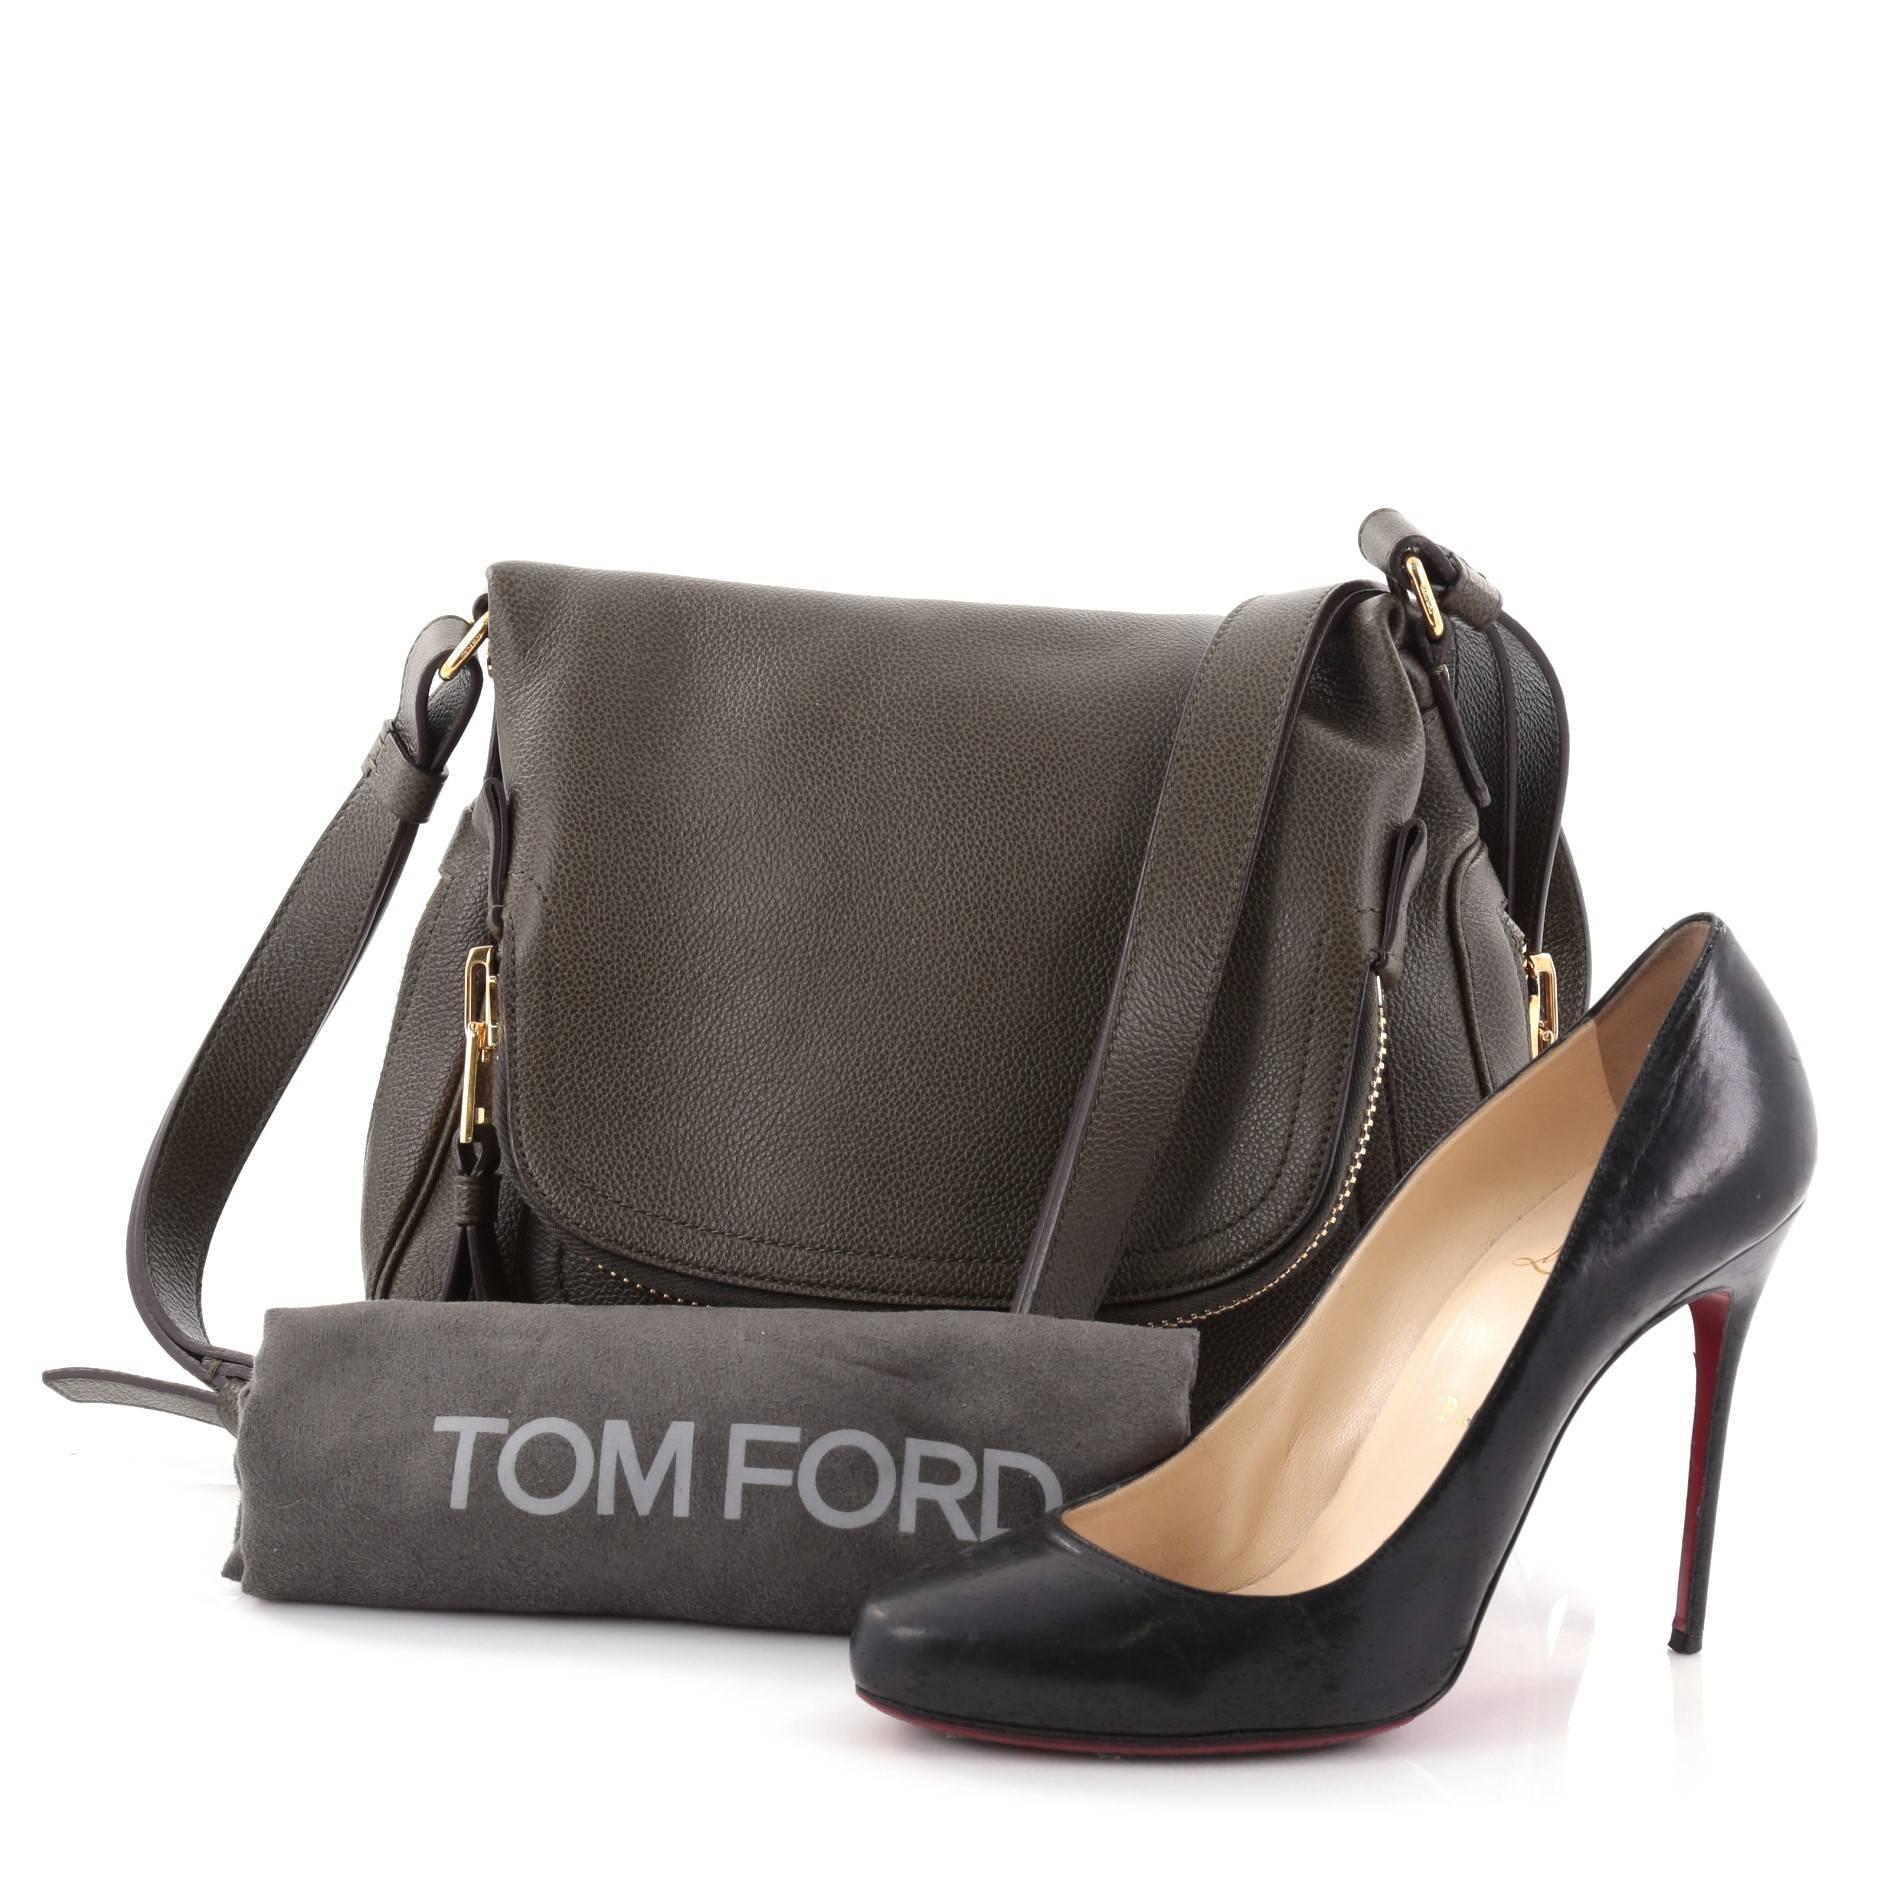 This authentic Tom Ford Jennifer Crossbody Bag Leather Medium redefines modern luxury with timeless elegance. Crafted in olive green leather, this signature saddle shoulder bag features an adjustable crossbody strap, zip-top fold-over flap,